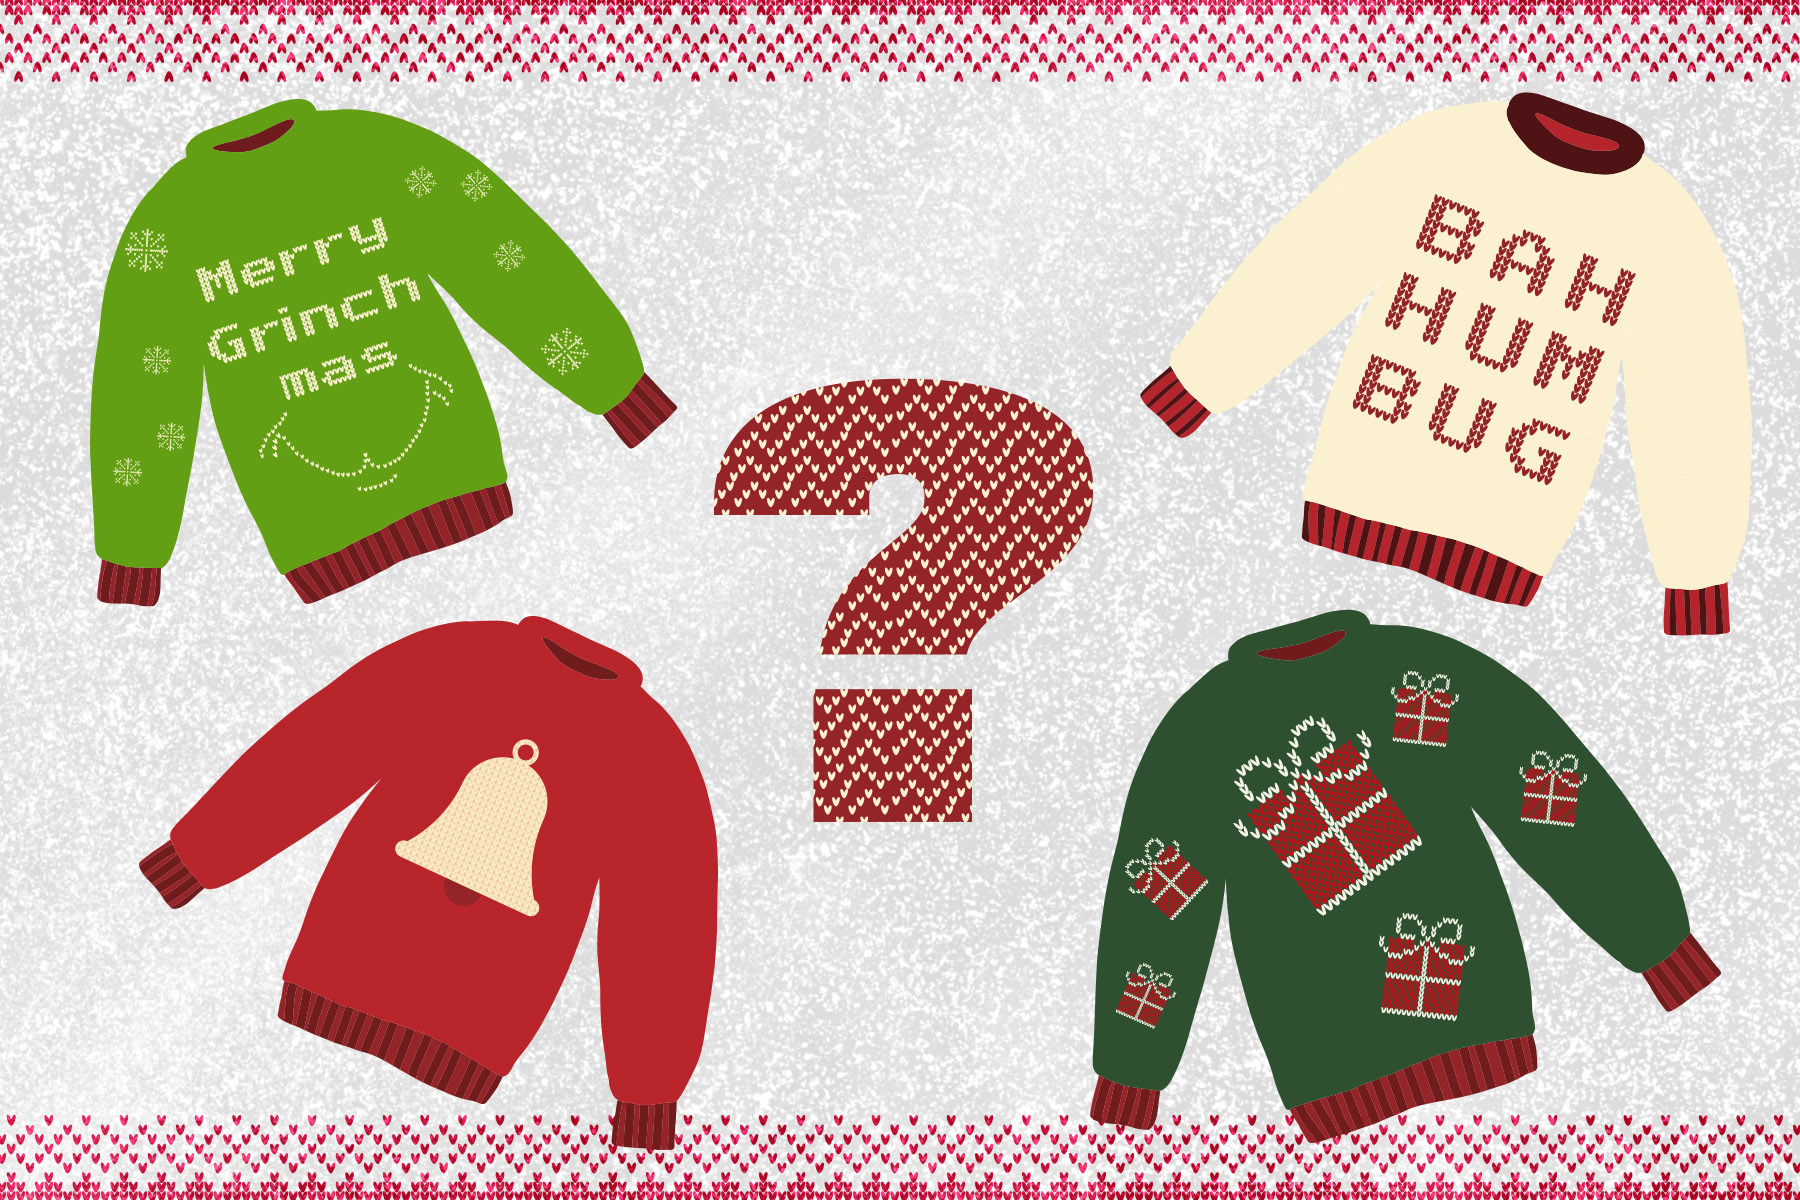 An illustration of Christmas sweaters with various holiday symbols on them.